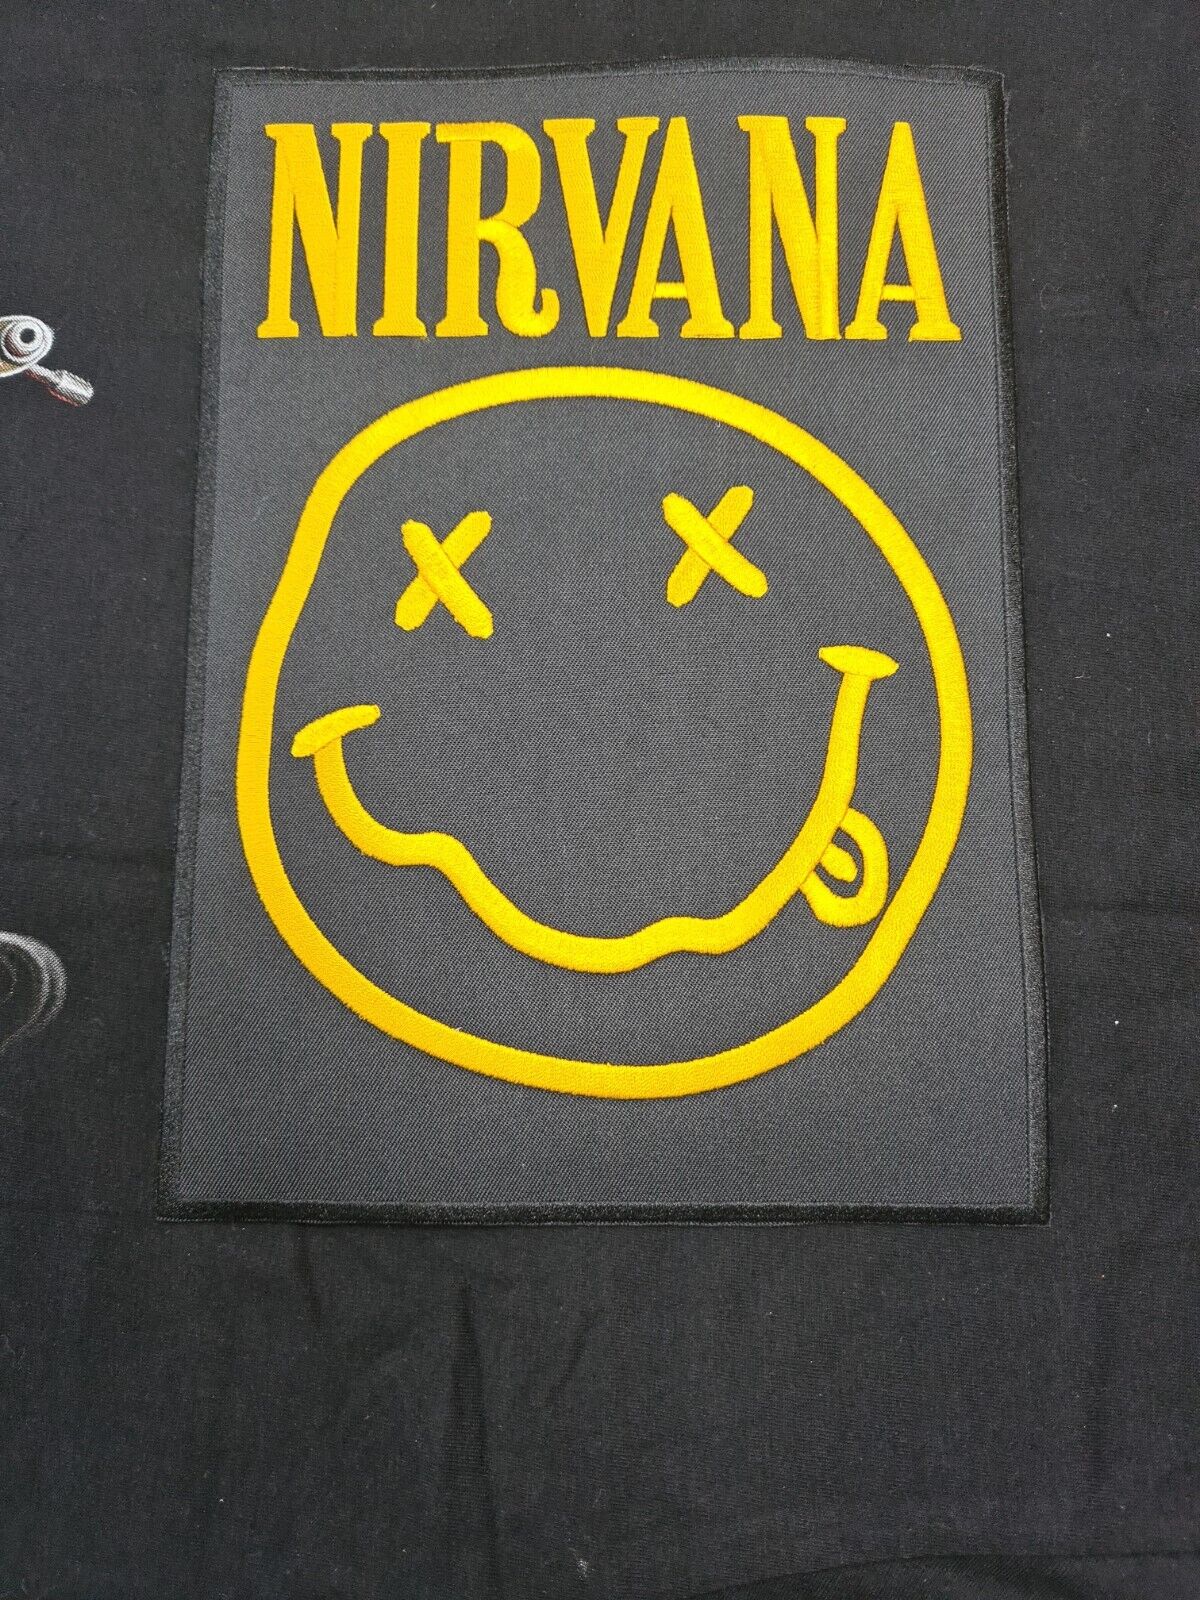 NIRVANA Patch Iron On Sew On Embroidered New Music Band Big Size 180mm X 250mm